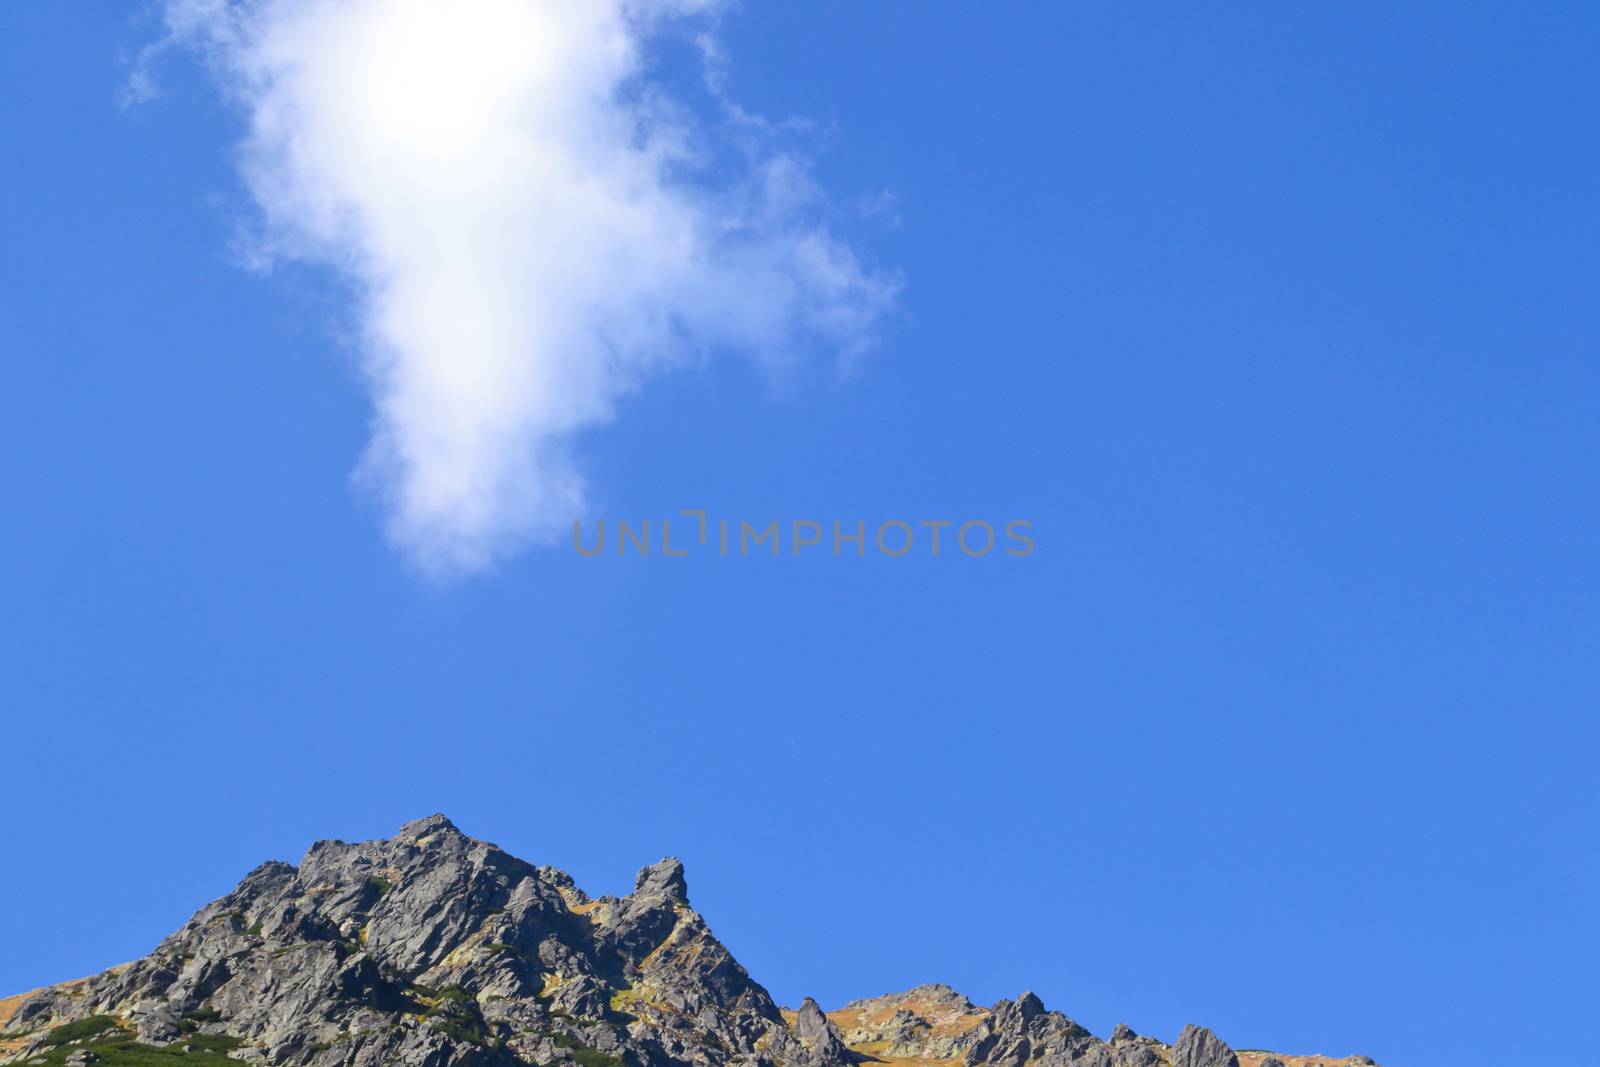 A cloud against a blue sky hovered over the top of the mountain. Background to illustrate heights or maximum possible achievements